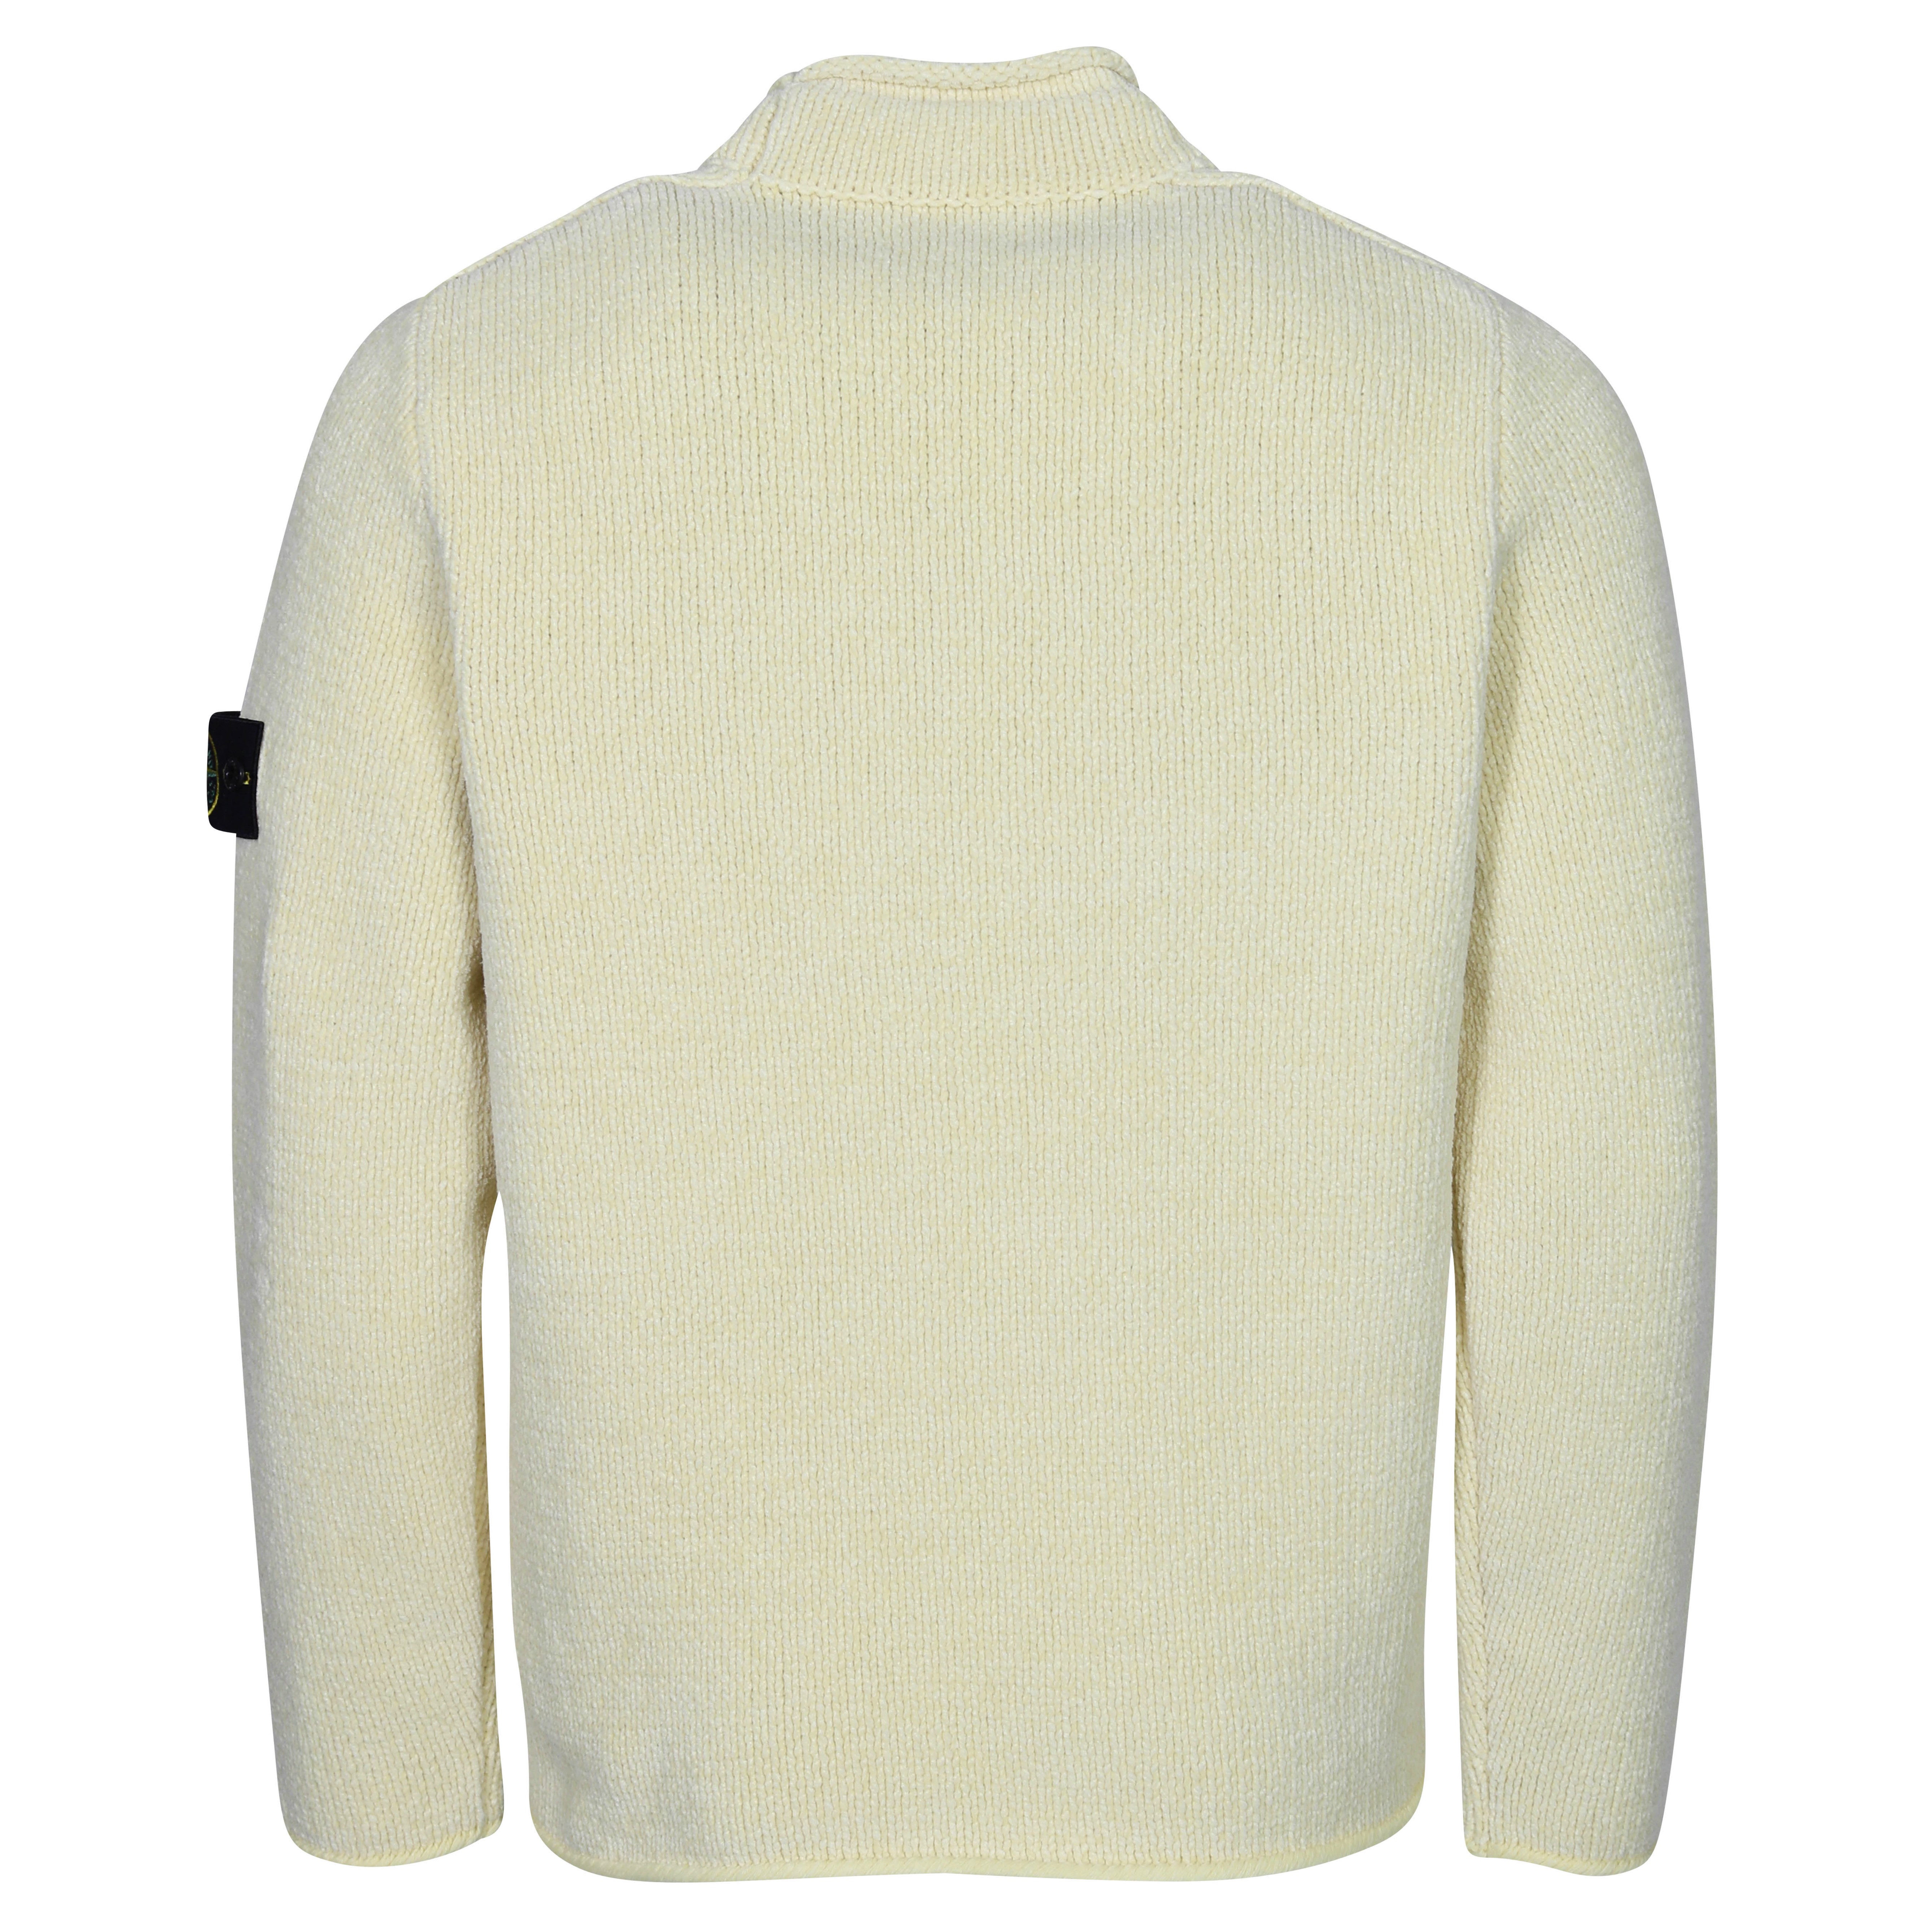 Stone Island Knit Pullover in Light Yellow